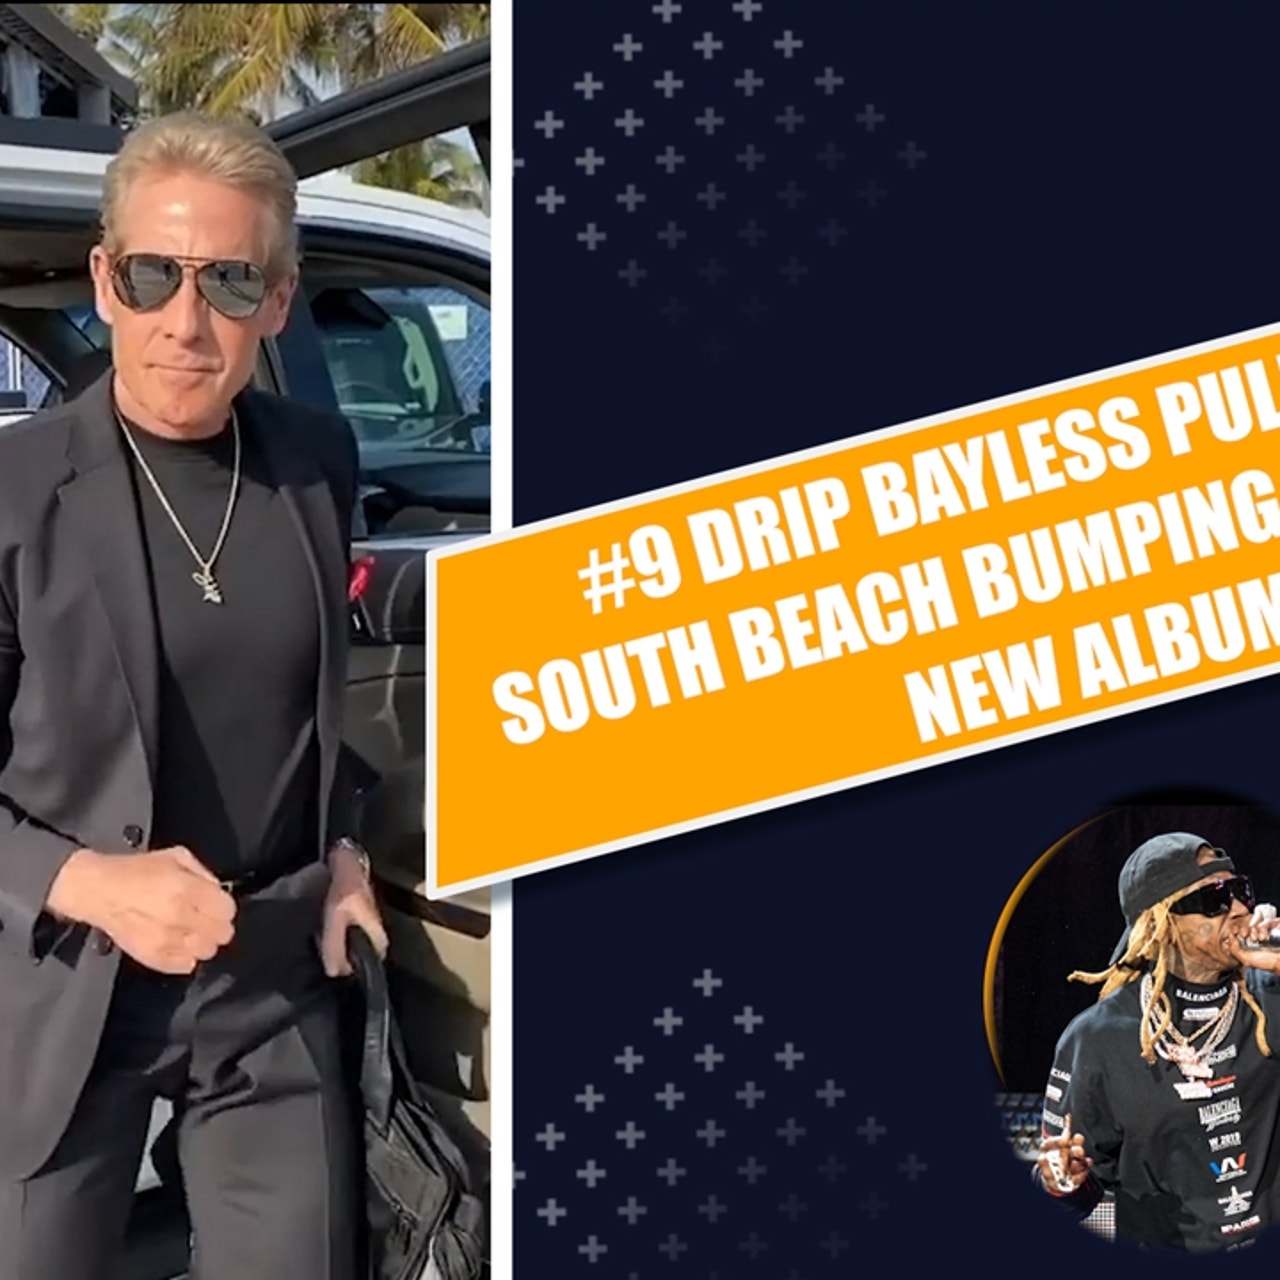 9 Drip Bayless pulls up in South Beach bumping Lil Wayne's new album! ' Top  10 Moments of the Year